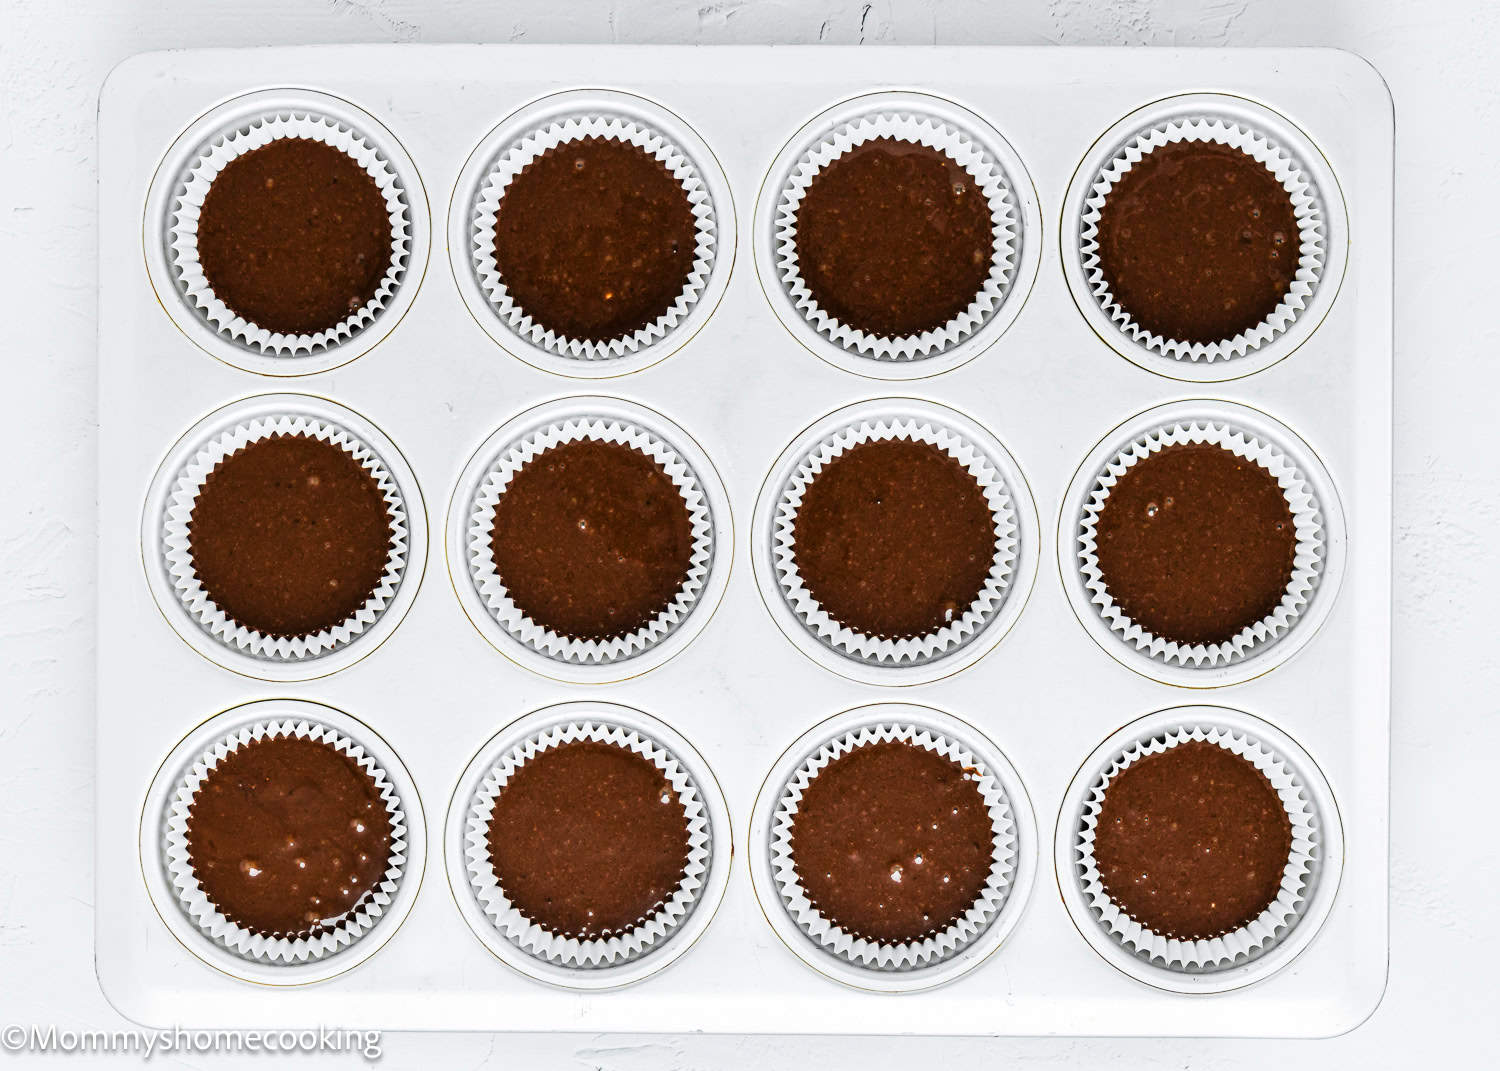 unbaked eggless, dairy-free Chocolate Cupcakes in a cupcakes pan.